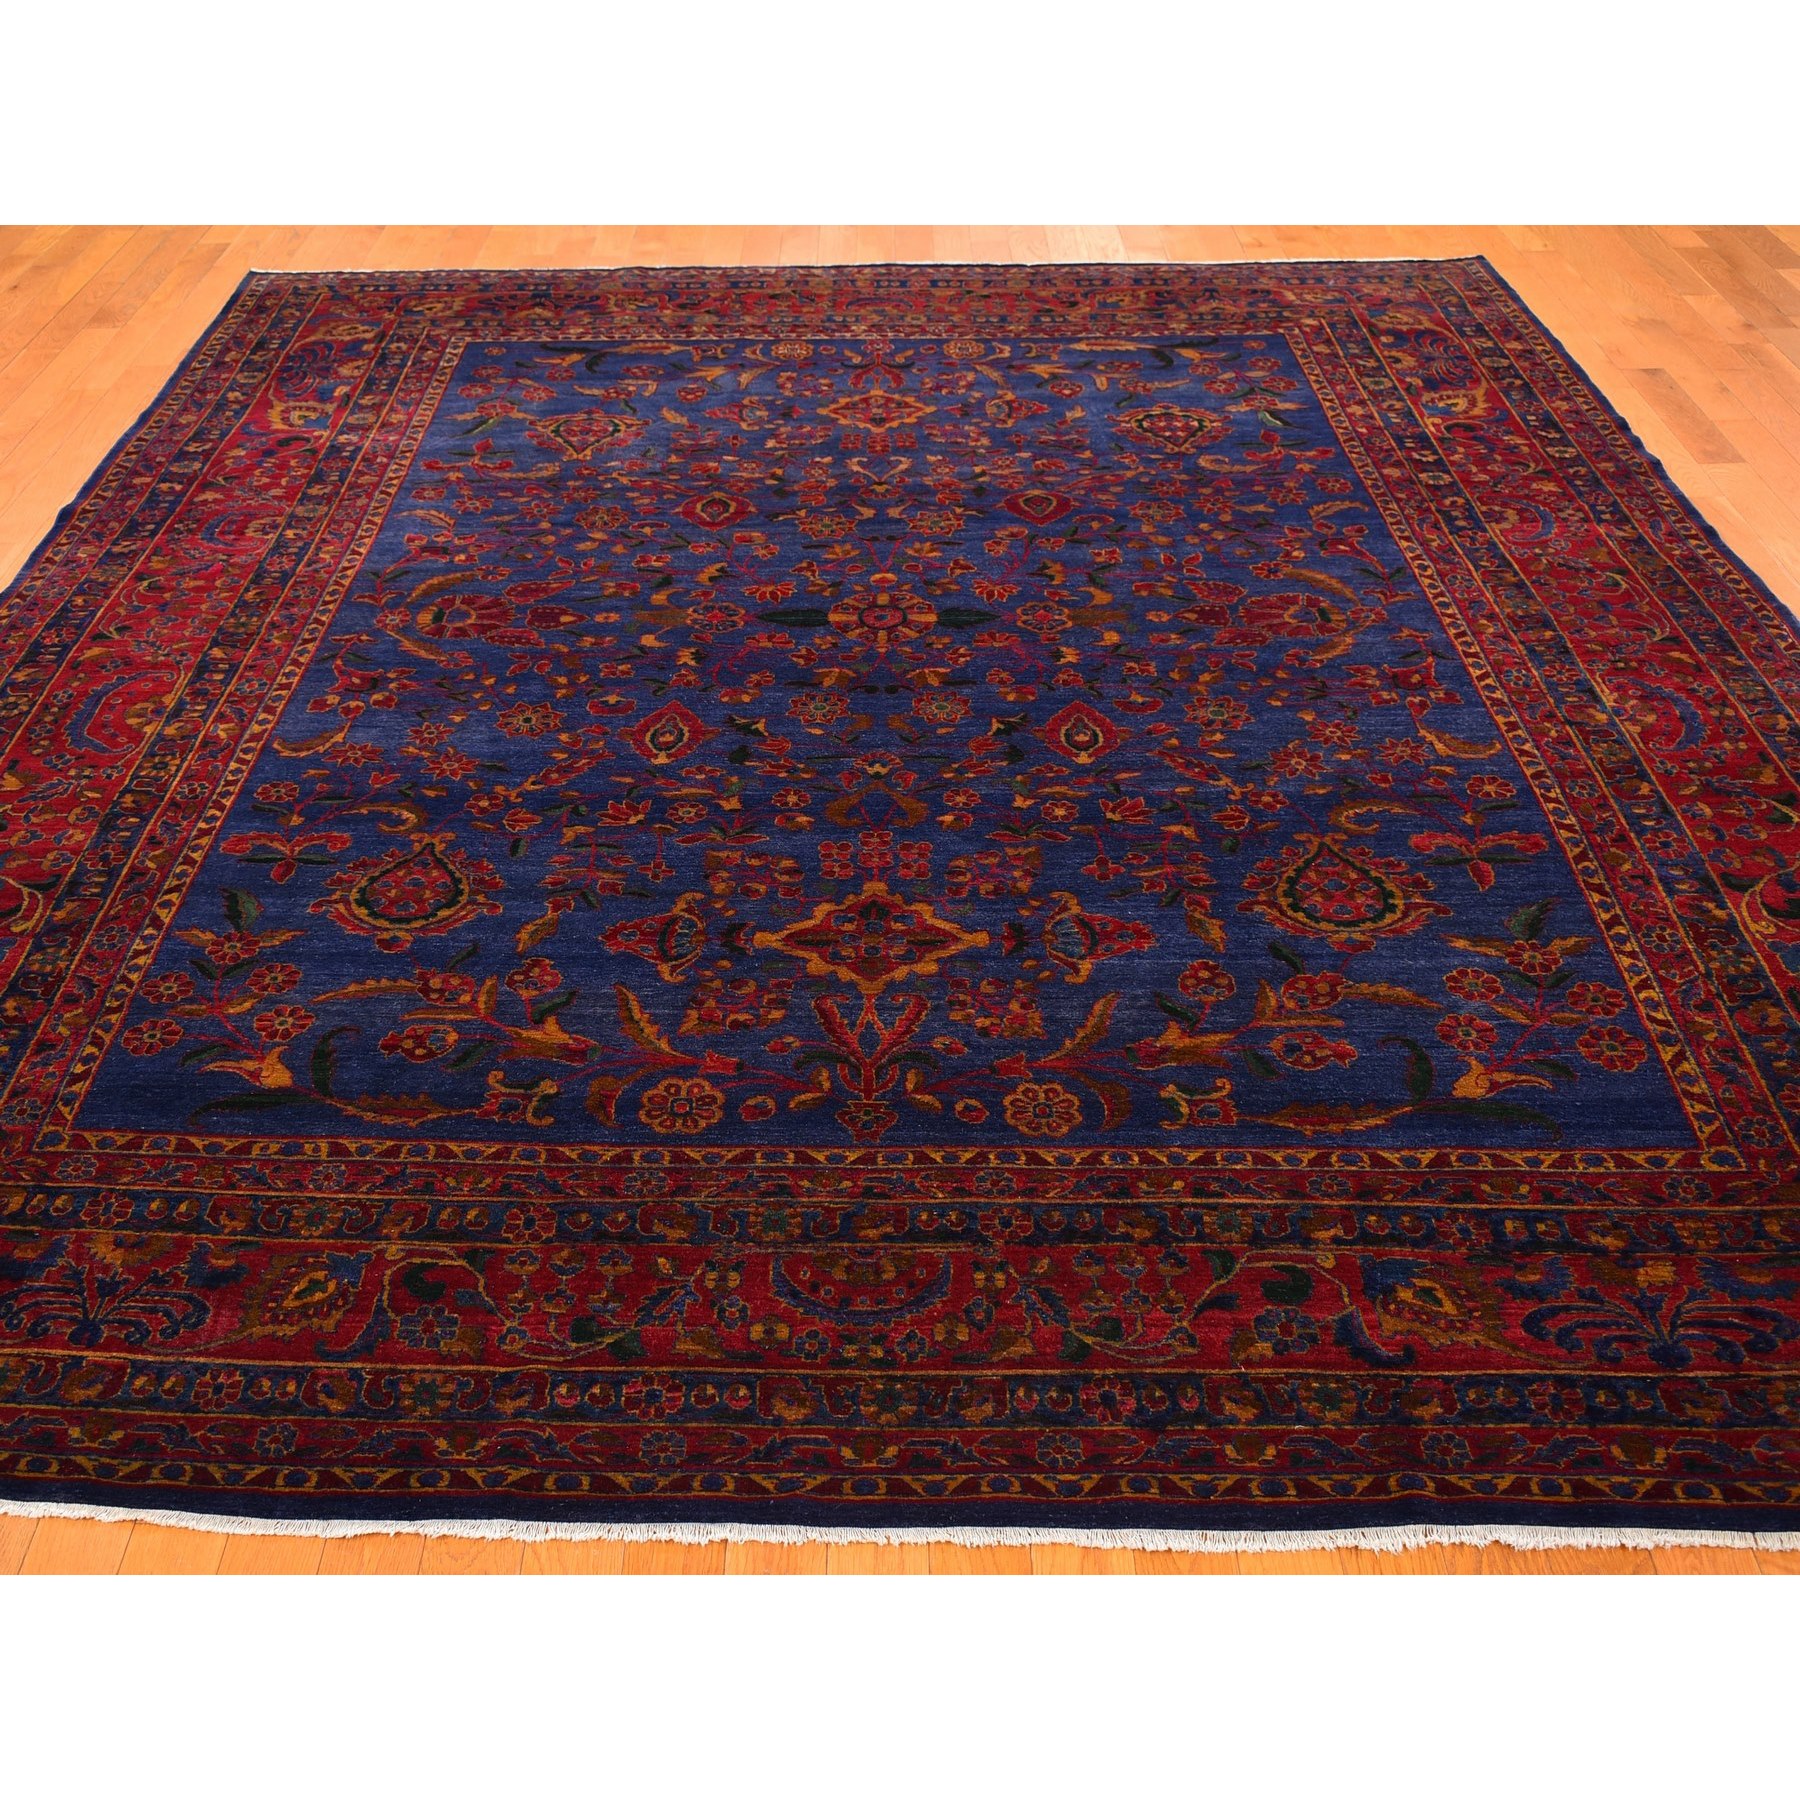 8'10"x11'1" Antique Persian Kashan Good Condition Slight Wear Soft 300 KPSI Saturated Colors Pure Wool Hand Woven Oriental Rug 